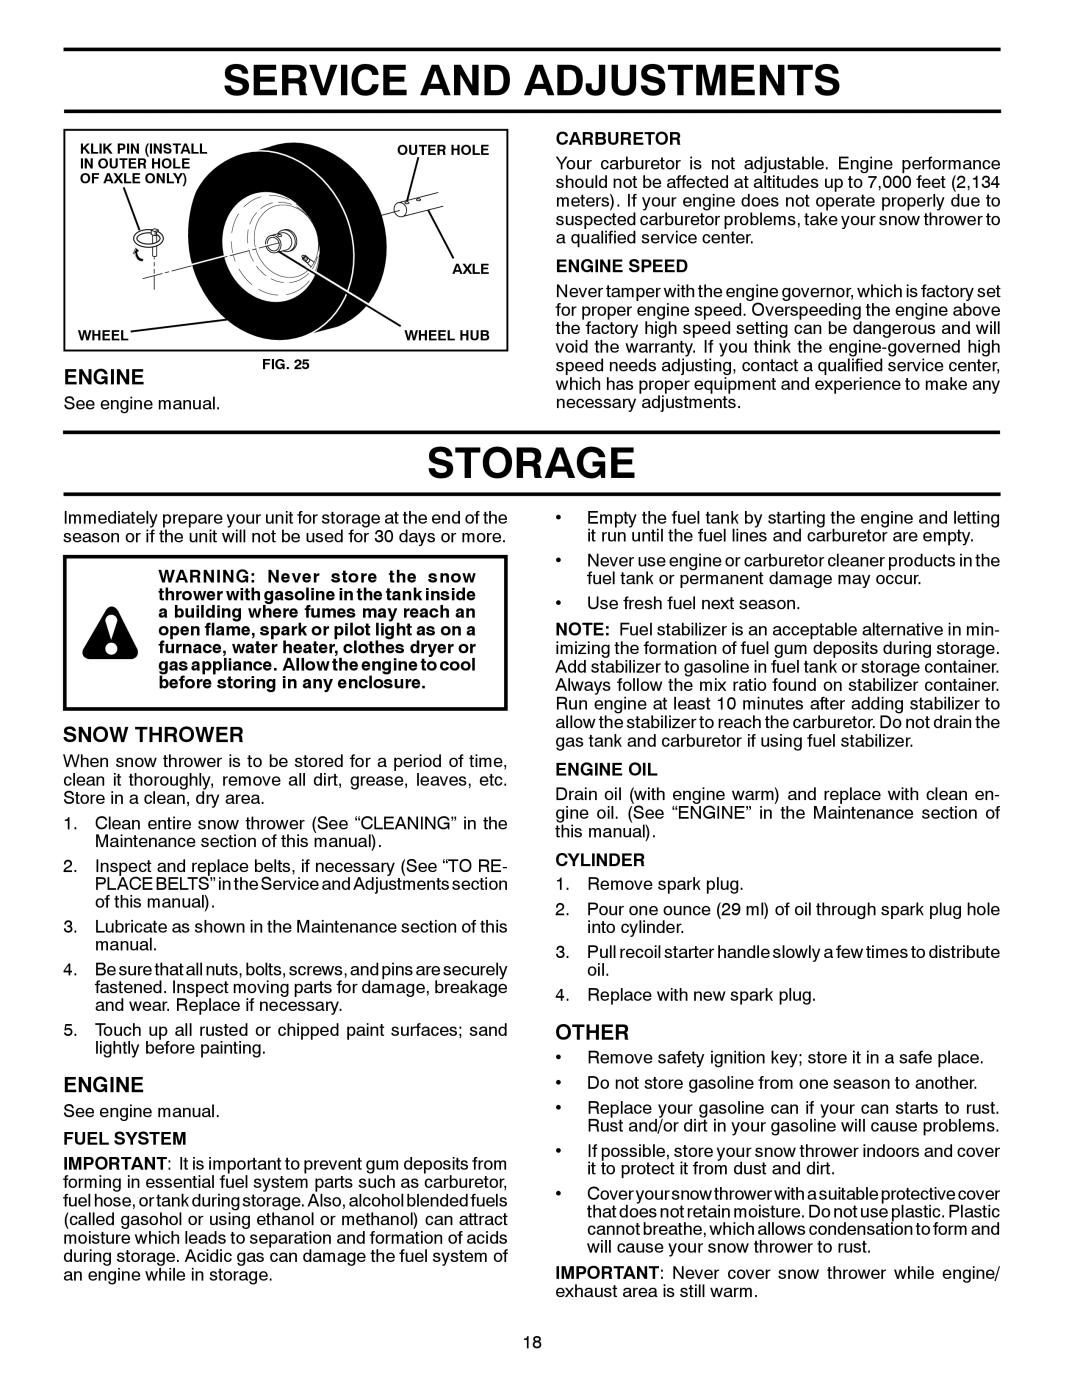 Poulan 420925 Storage, Other, Service And Adjustments, Snow Thrower, See engine manual, Carburetor, Engine Speed 